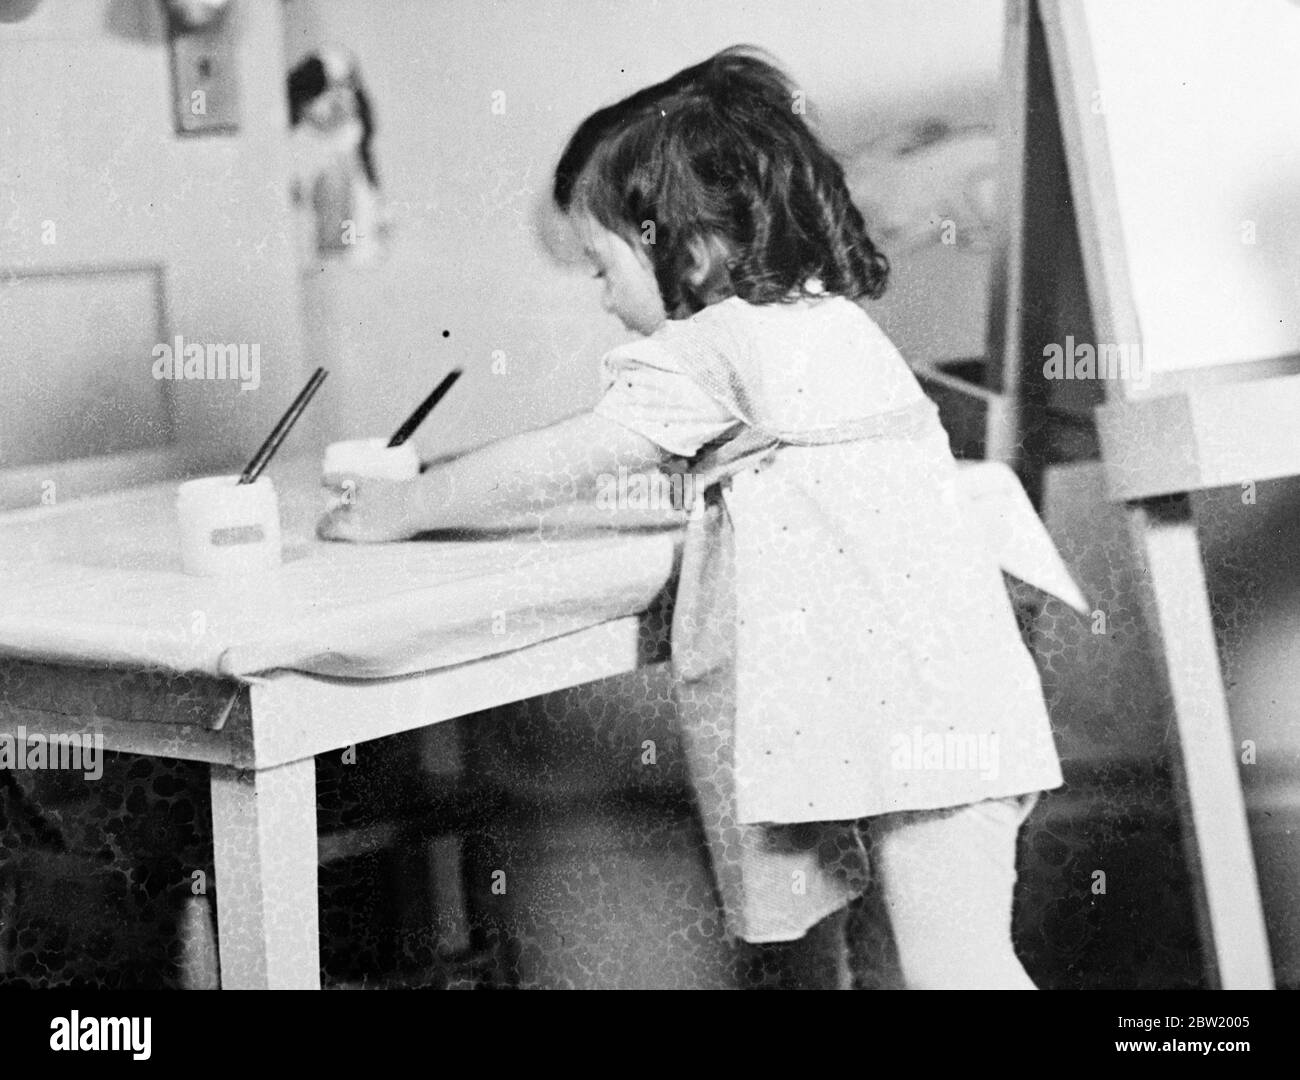 Marie eager to begin work on a masterpiece in the Dionne nursery at calendar, Ontario. The Dionee quintuplets are beginning to experience the creative urge, the lucky Quins provided with pain is building blocks and other means of self-expression. 18 July 1937. Stock Photo